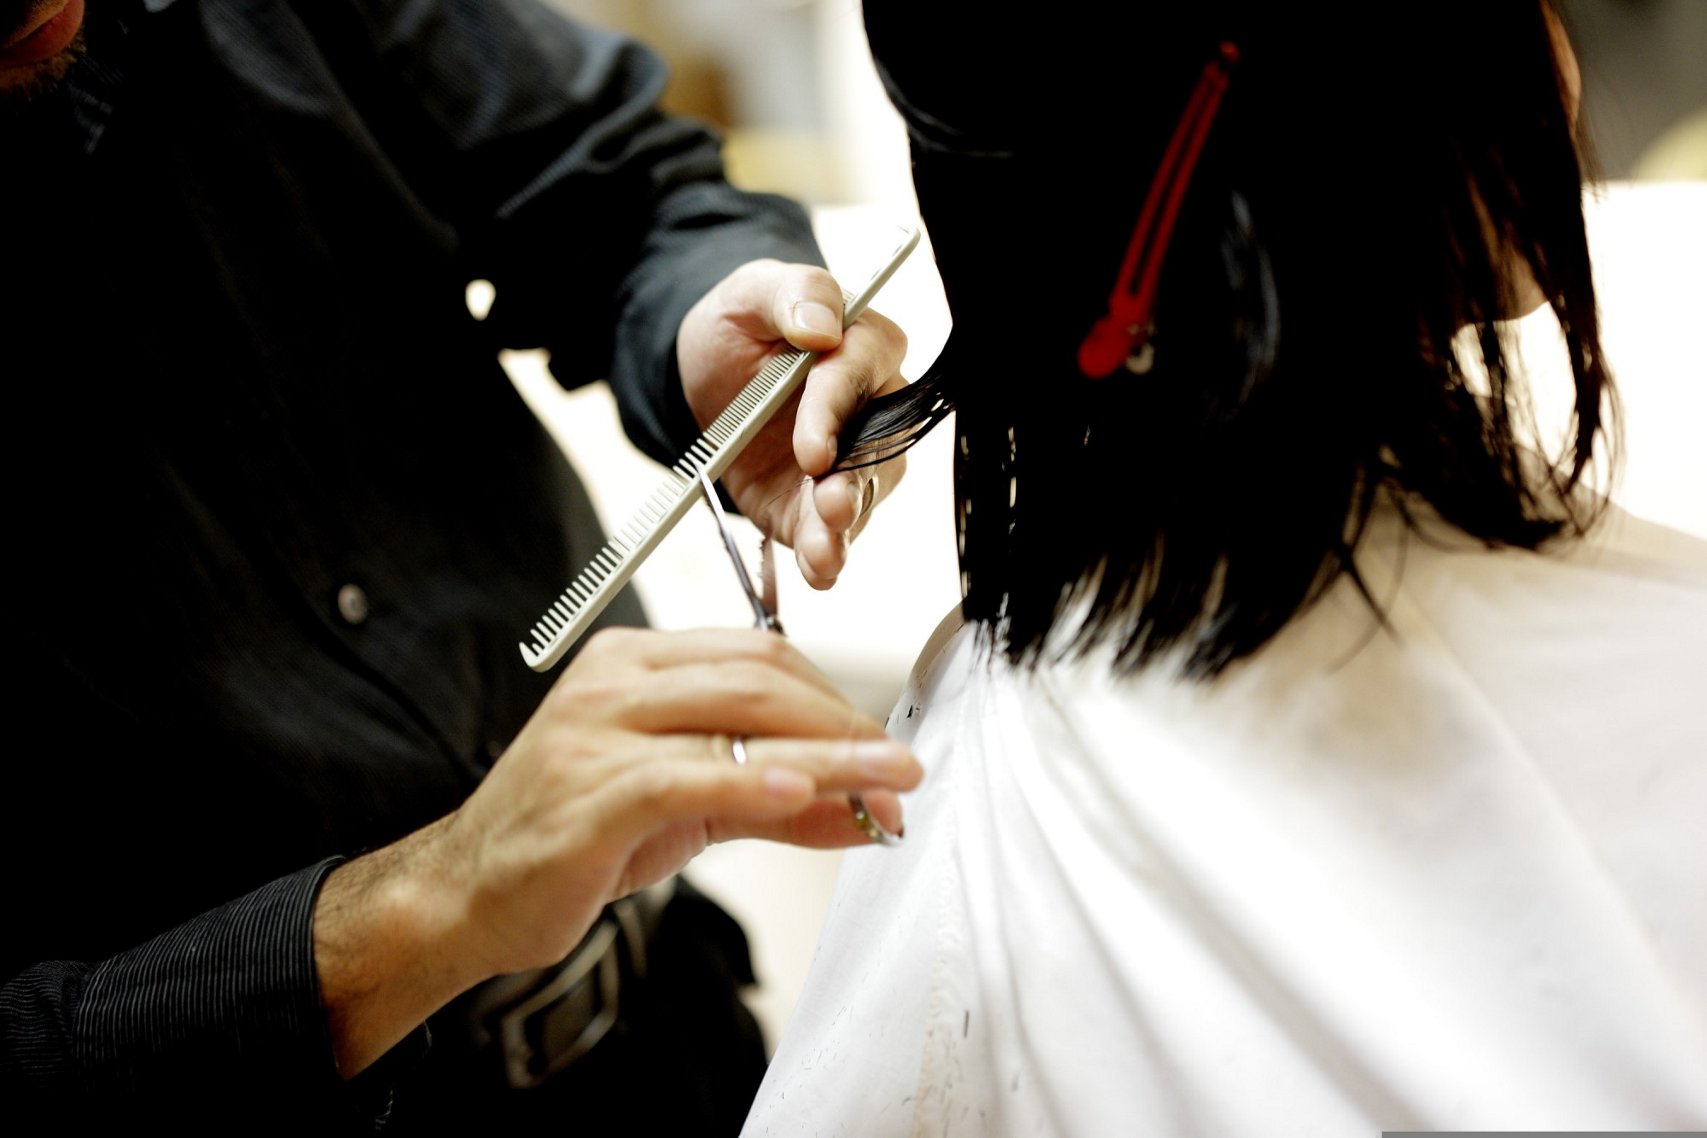 Woman with dark hair getting a trim in the hairdresser